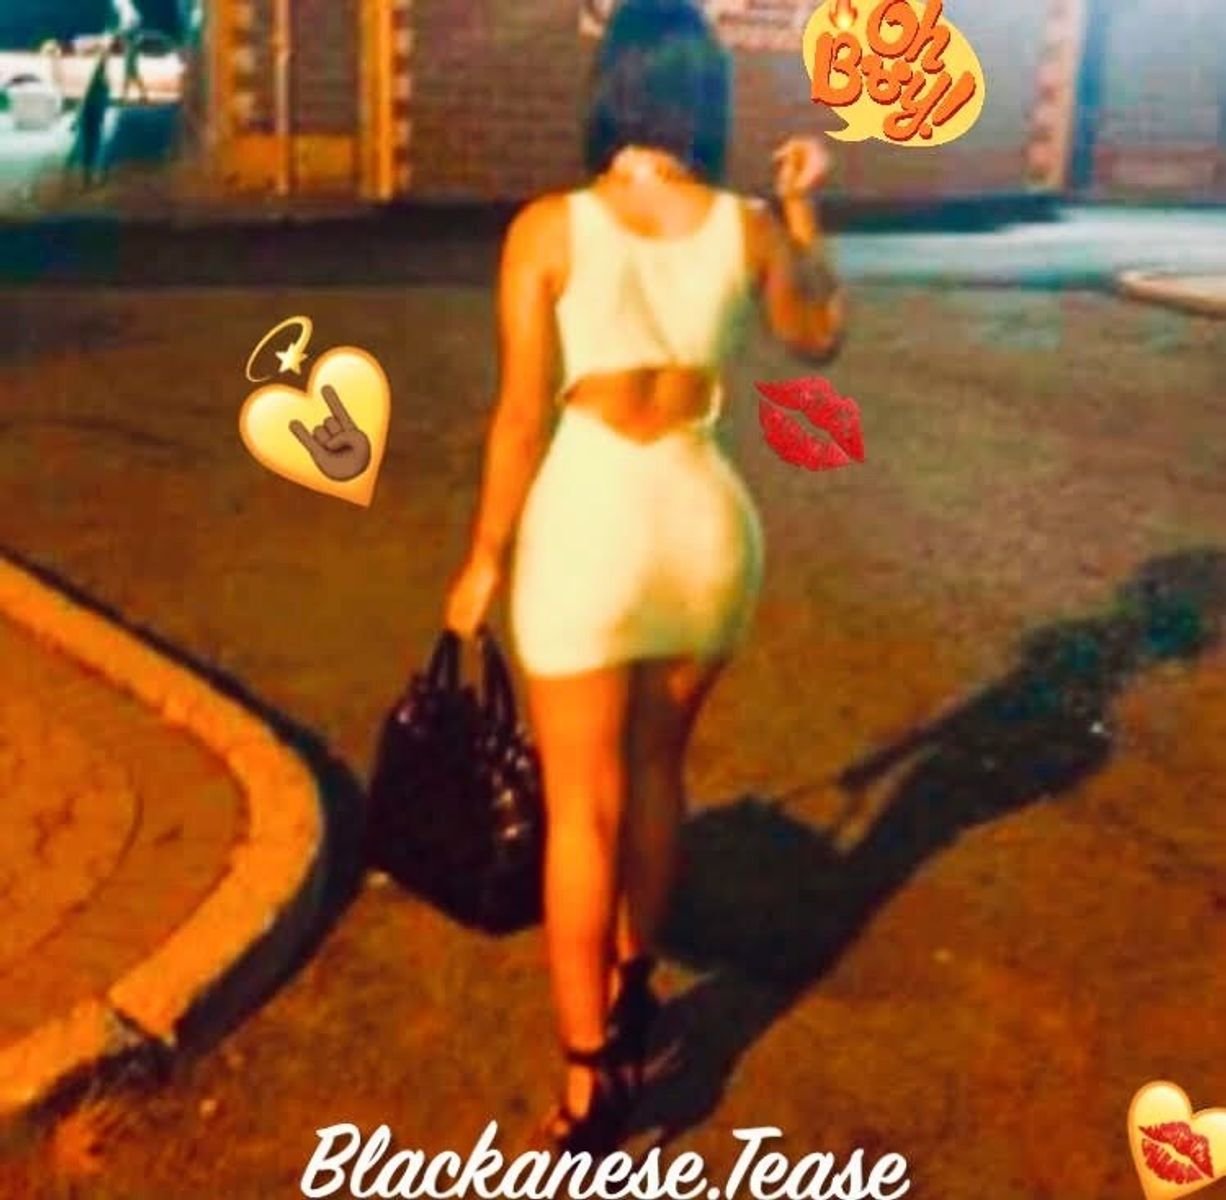 Skype live sex chat with Blackaneese